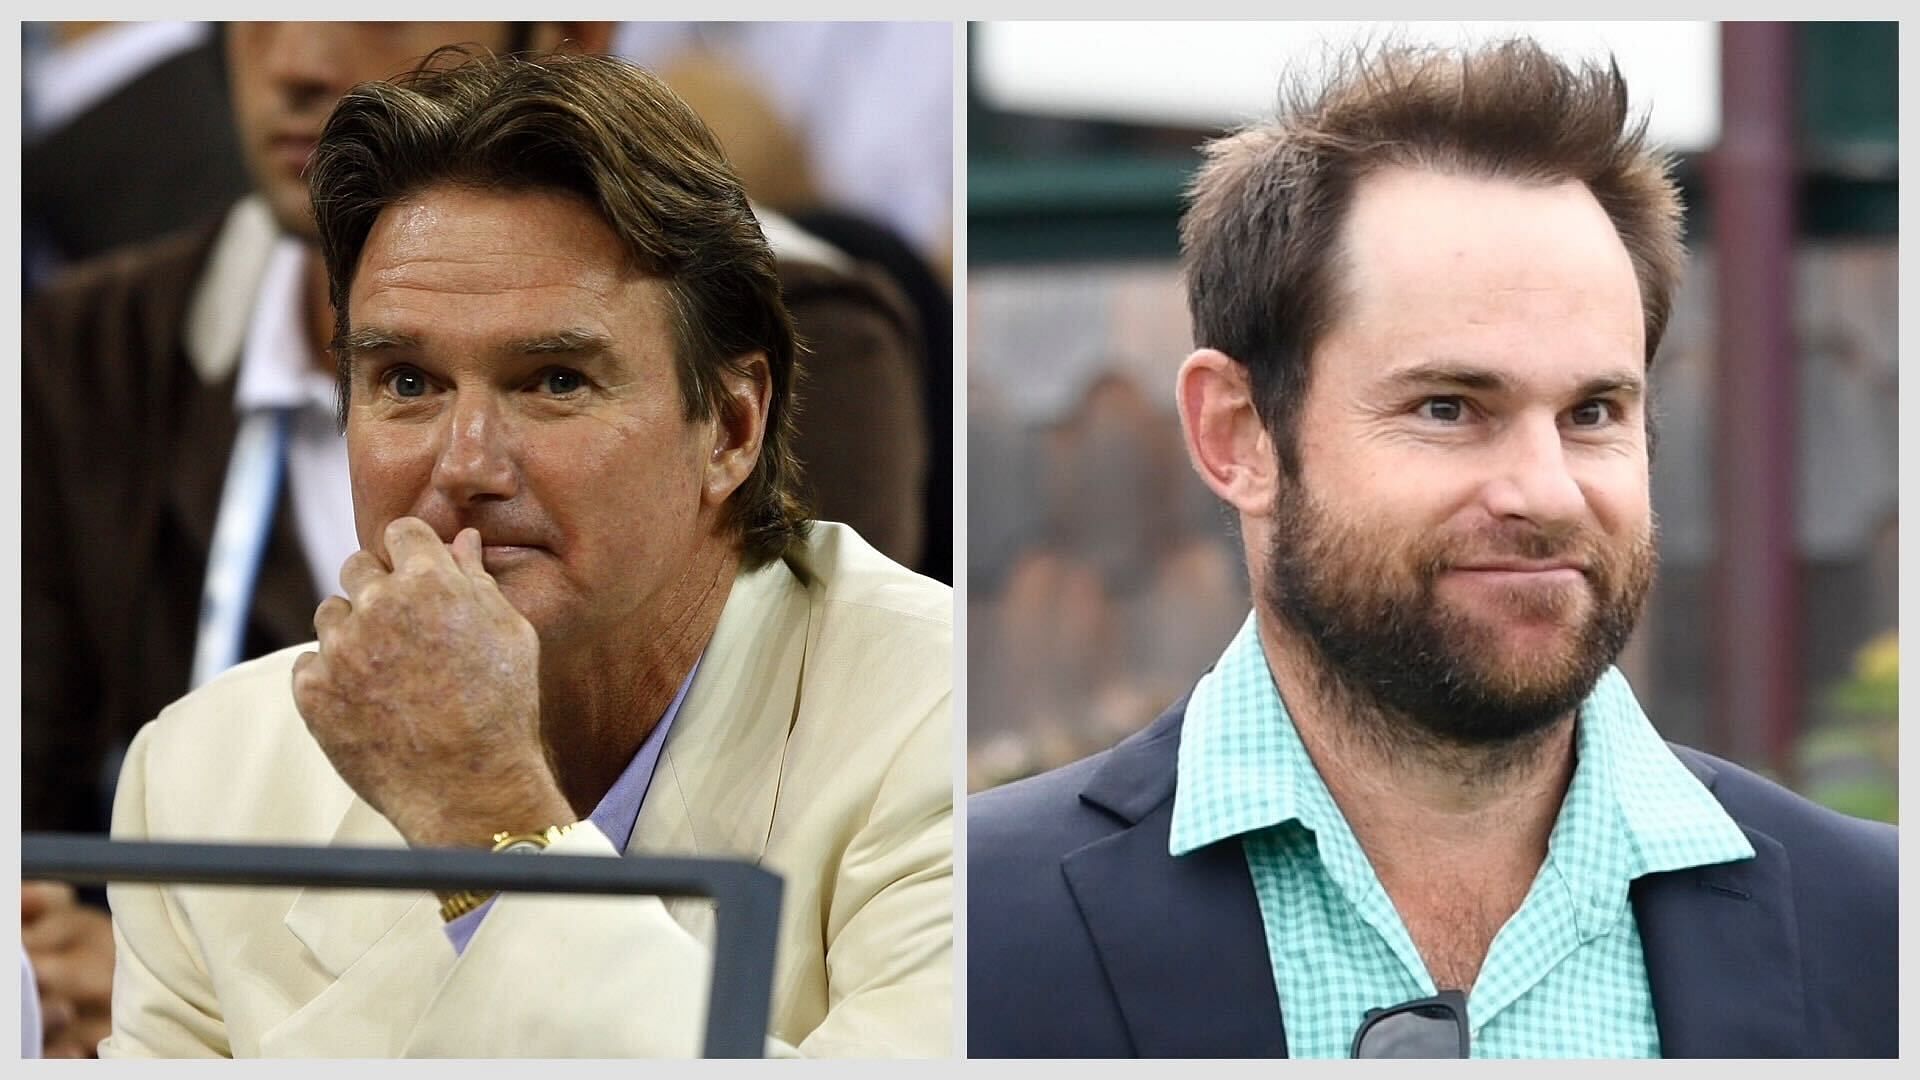 Jimmy Connors and Andy Roddick are former American World No. 1s.